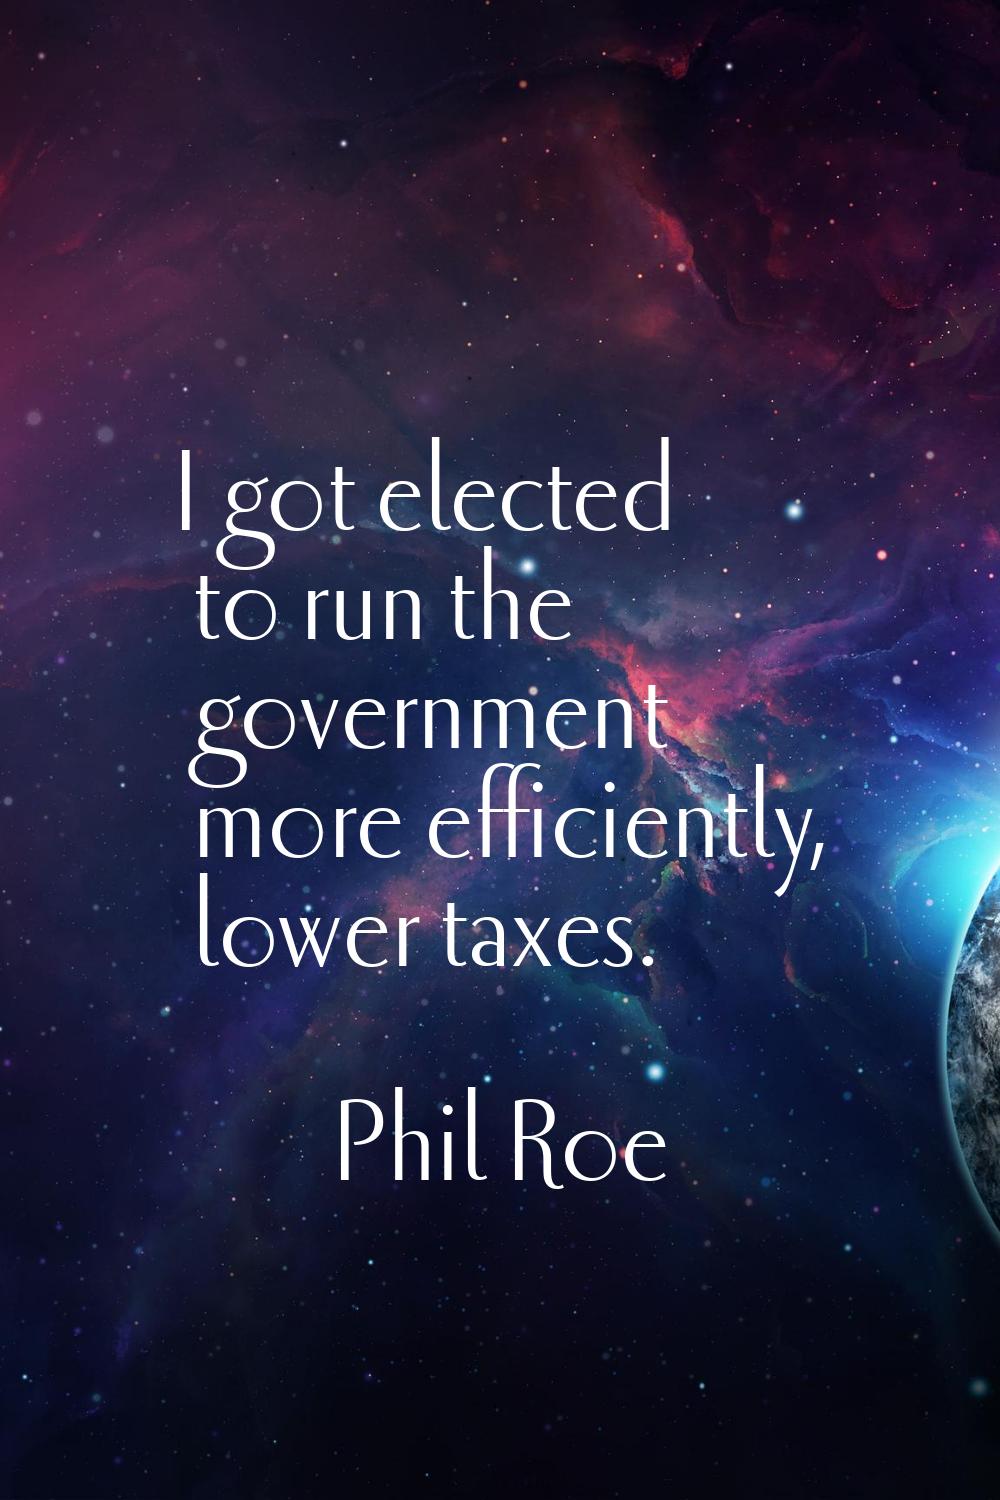 I got elected to run the government more efficiently, lower taxes.